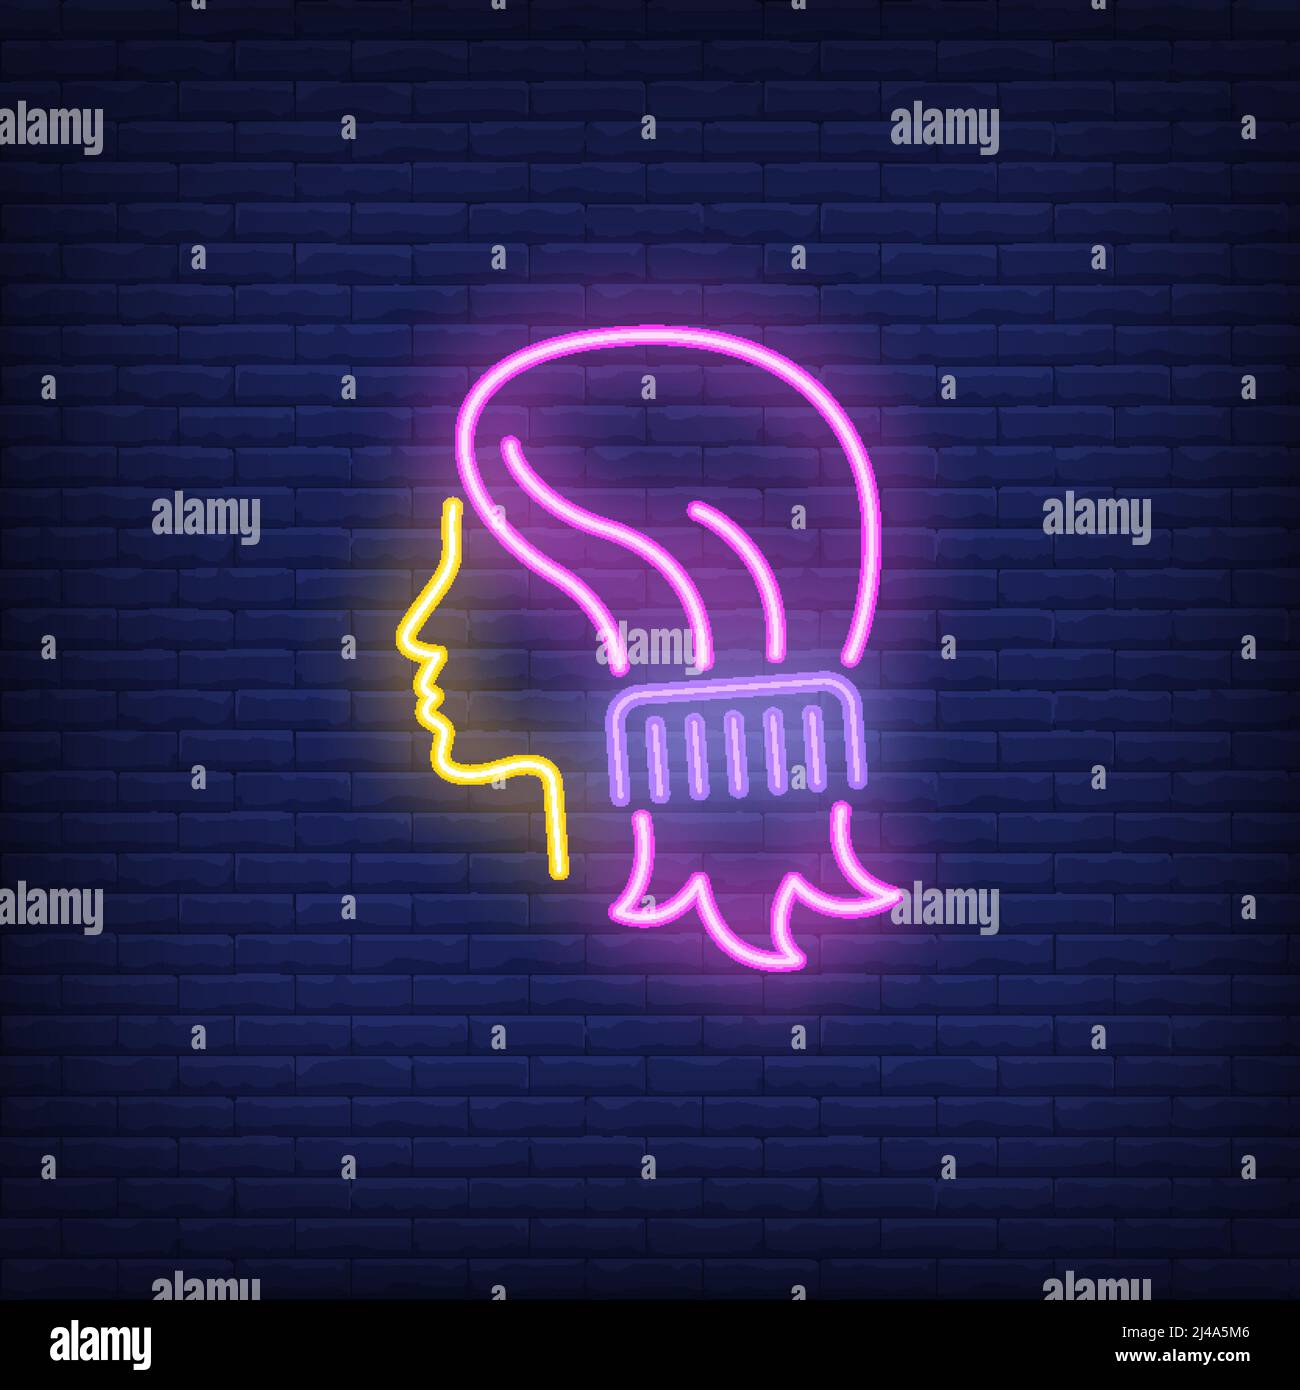 Comb combing woman hair neon sign. Hairdressing salon, style and fashion concept. Advertisement design. Night bright colorful billboard, light banner. Stock Vector